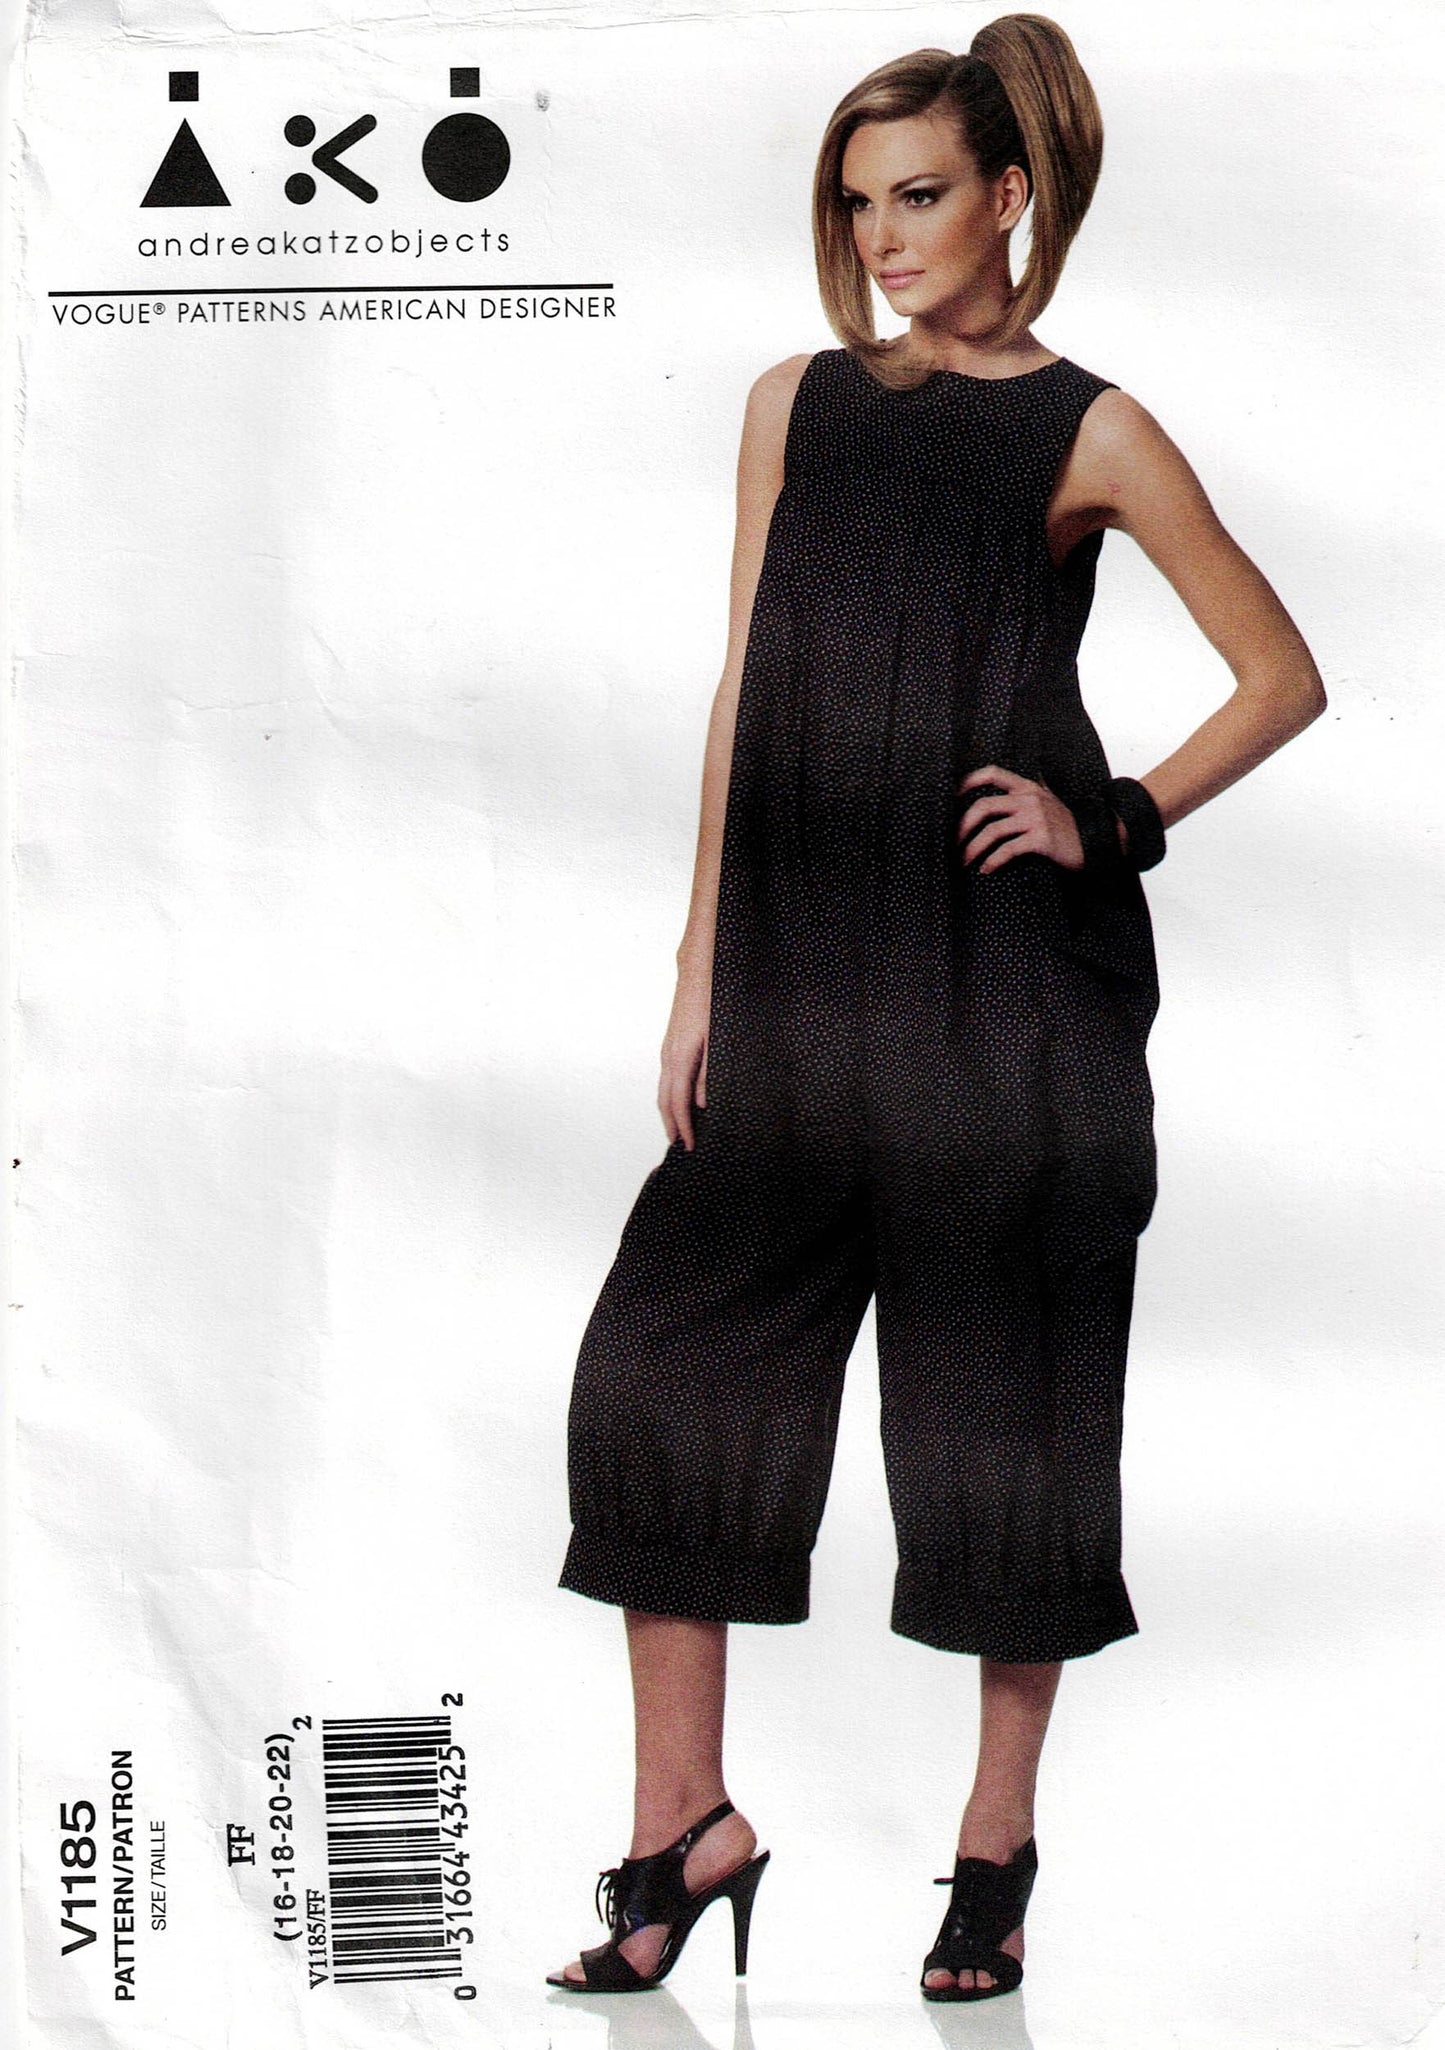 Vogue American Designer 1185 Andrea Katzobjects Womens Loose Fitting Pleated Jumpsuit Out Of Print Sewing Pattern Size 8 - 14 or 16 - 22 UNCUT Factory Folded